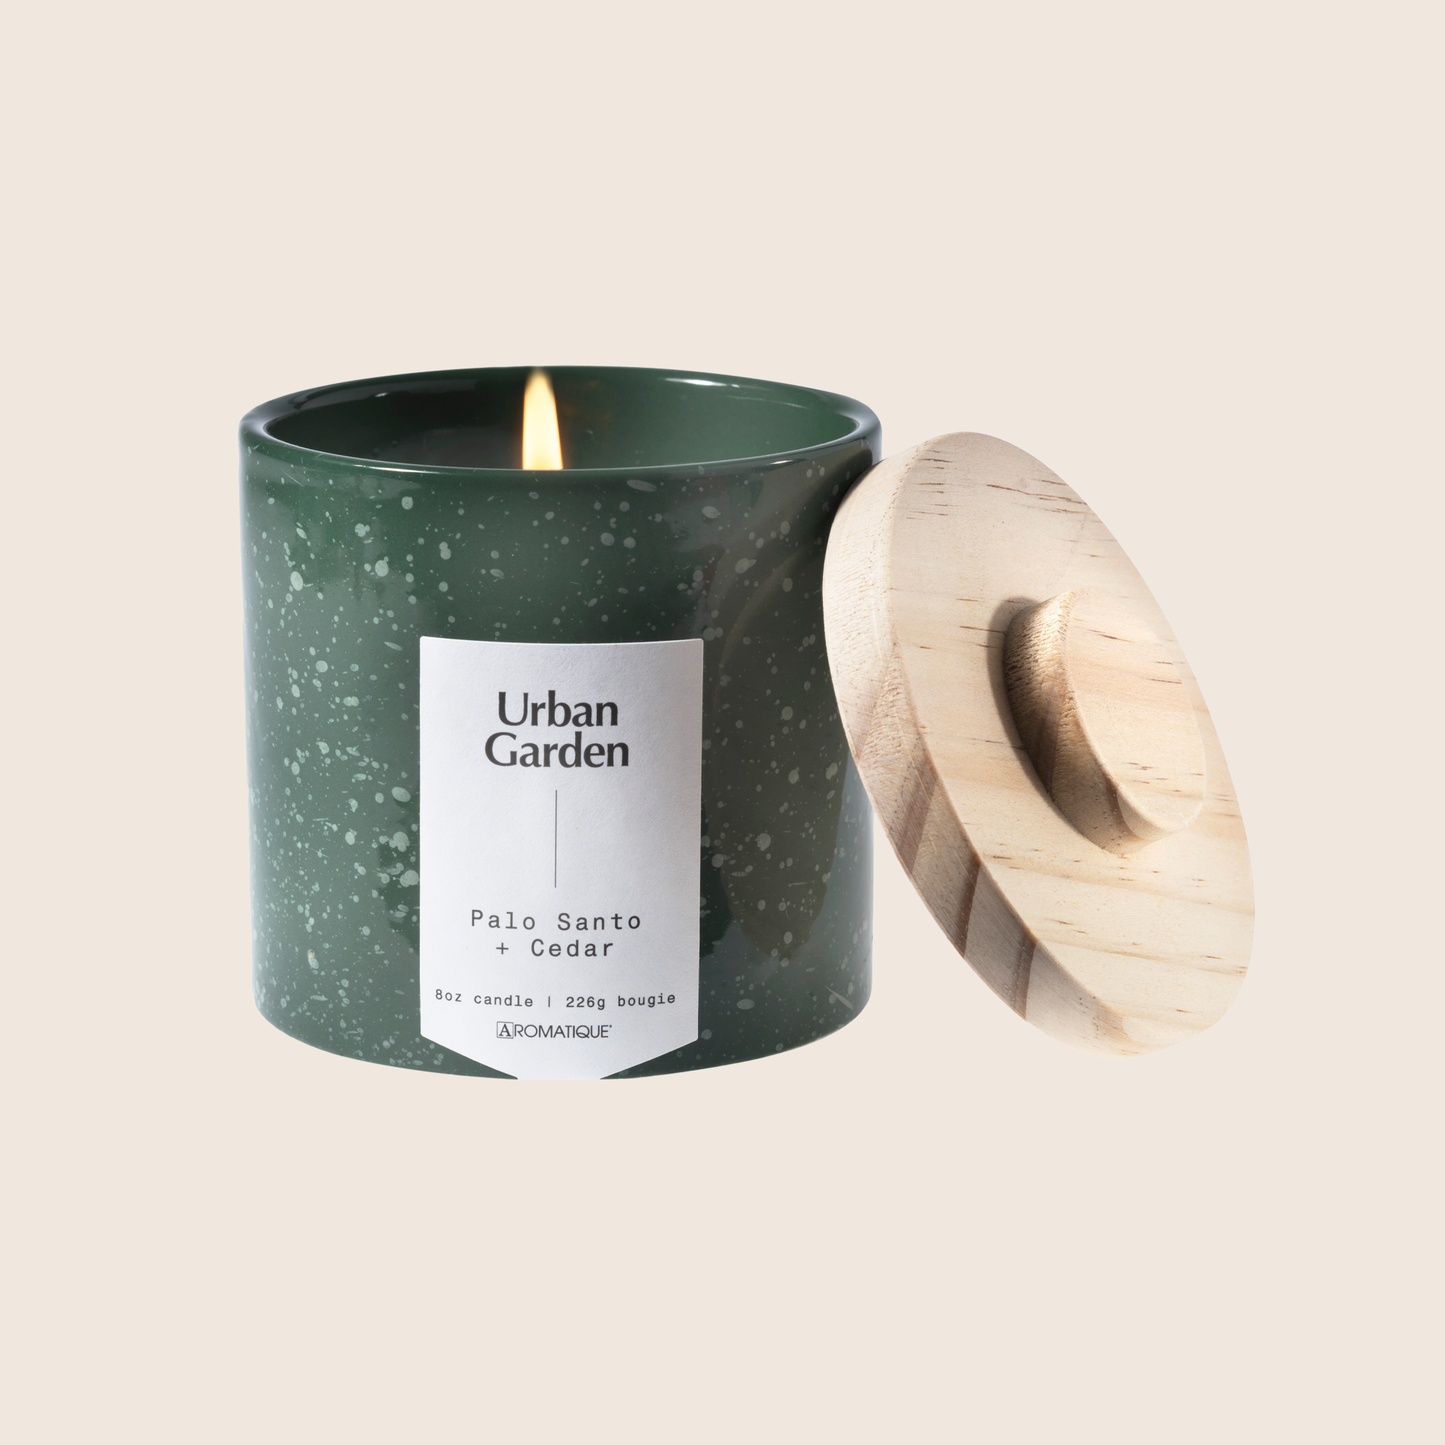 Palo Santo & Cedar fills your space with the essence of burning palo santo combined with notes of cedarwood, amber and a light layer of coconut. Using coconut blend wax and cotton core wicks encompasses the natural elements that the Urban Gardener values. The speckled ceramic candle is a unique, yet neutral vessel and allows this candle to be used anywhere. Palo Santo & Cedar is the perfect everyday staple to bring outdoor inspirations inside. 